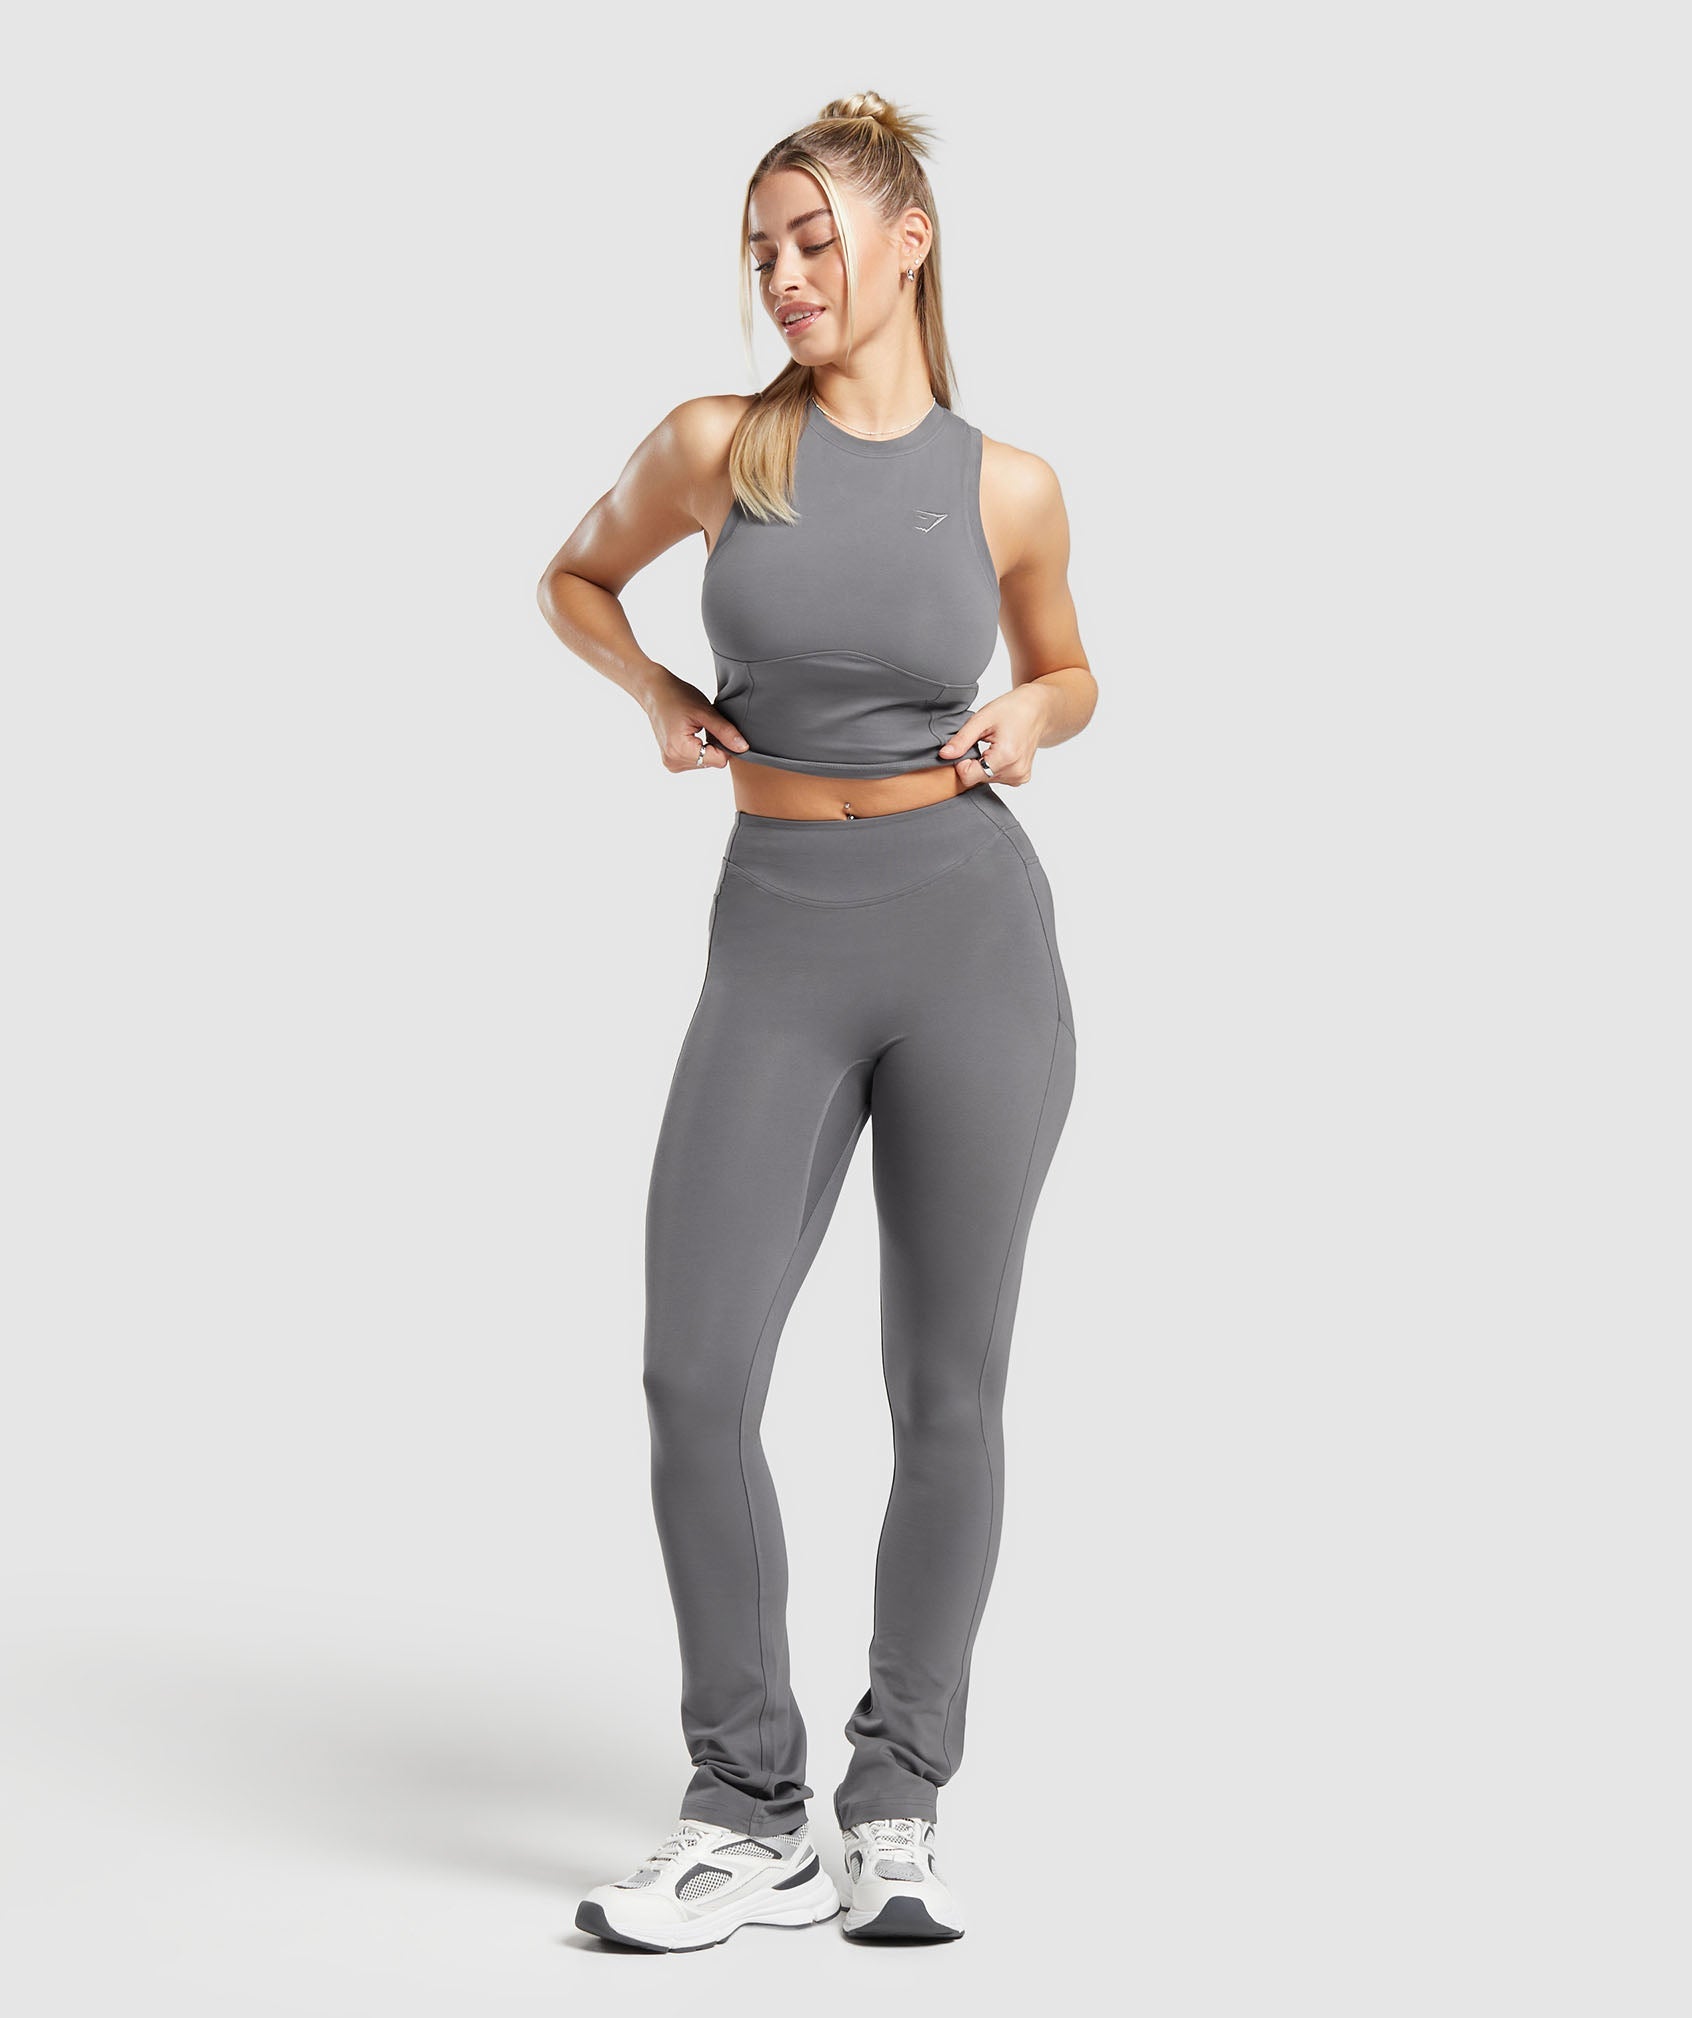 Rest Day Boot Cut Cotton Leggings in Brushed Grey - view 4